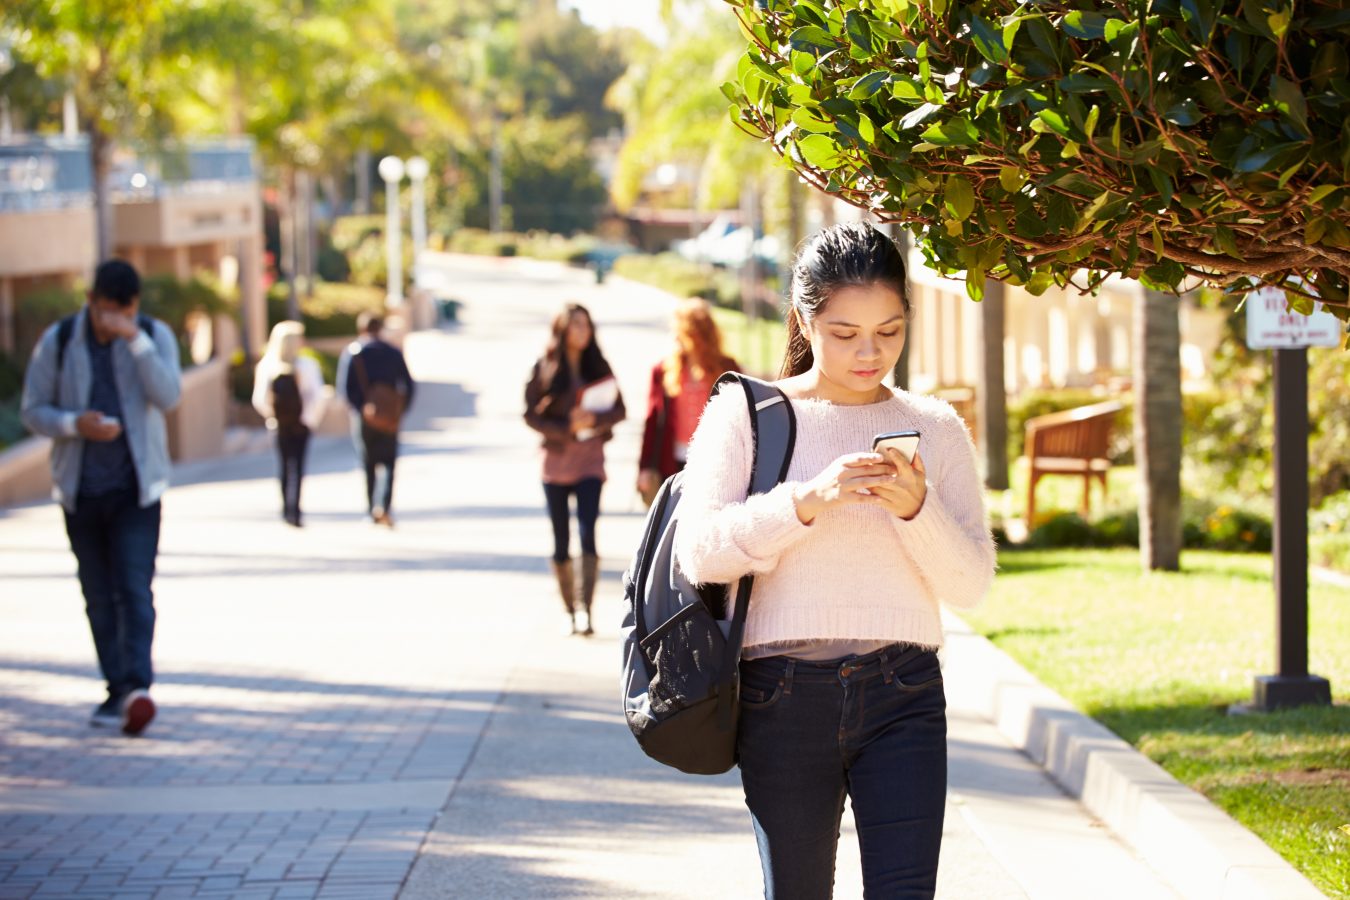 Student walking outdoors on college campus, while on her phone.